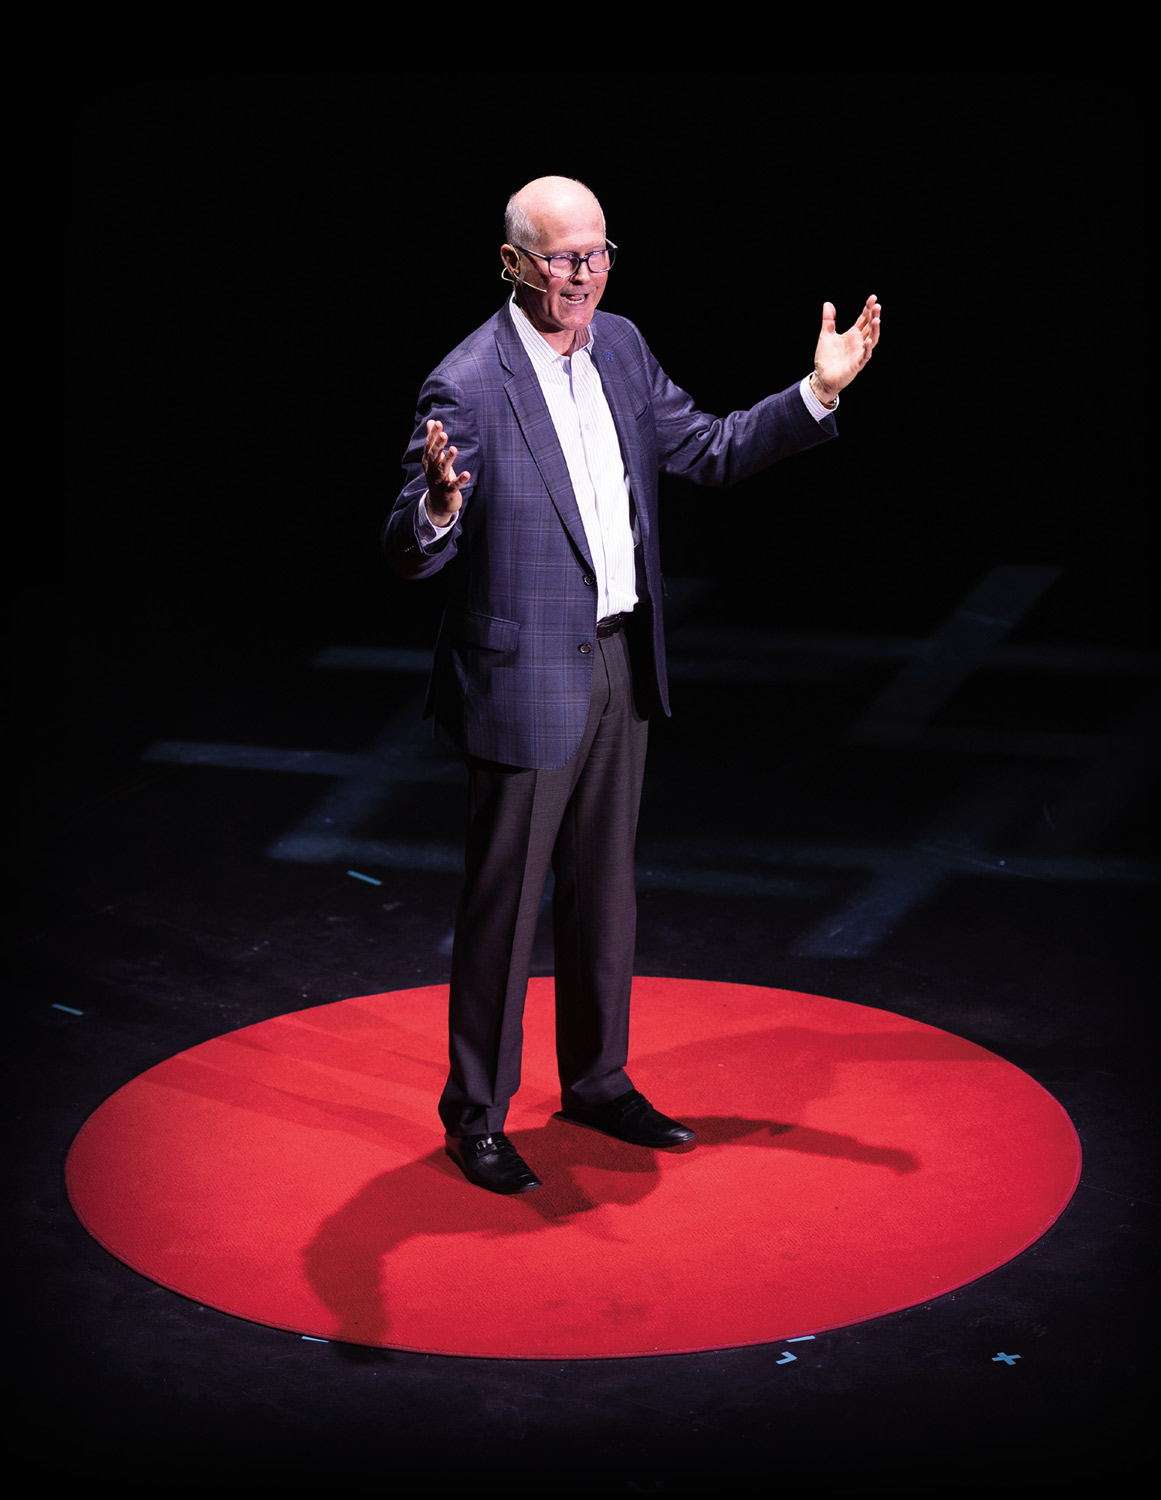 President James W. Dean Jr. delivering his TEDxPortsmouth talk standing on a vibrant red circular carpet in the center of a dark stage